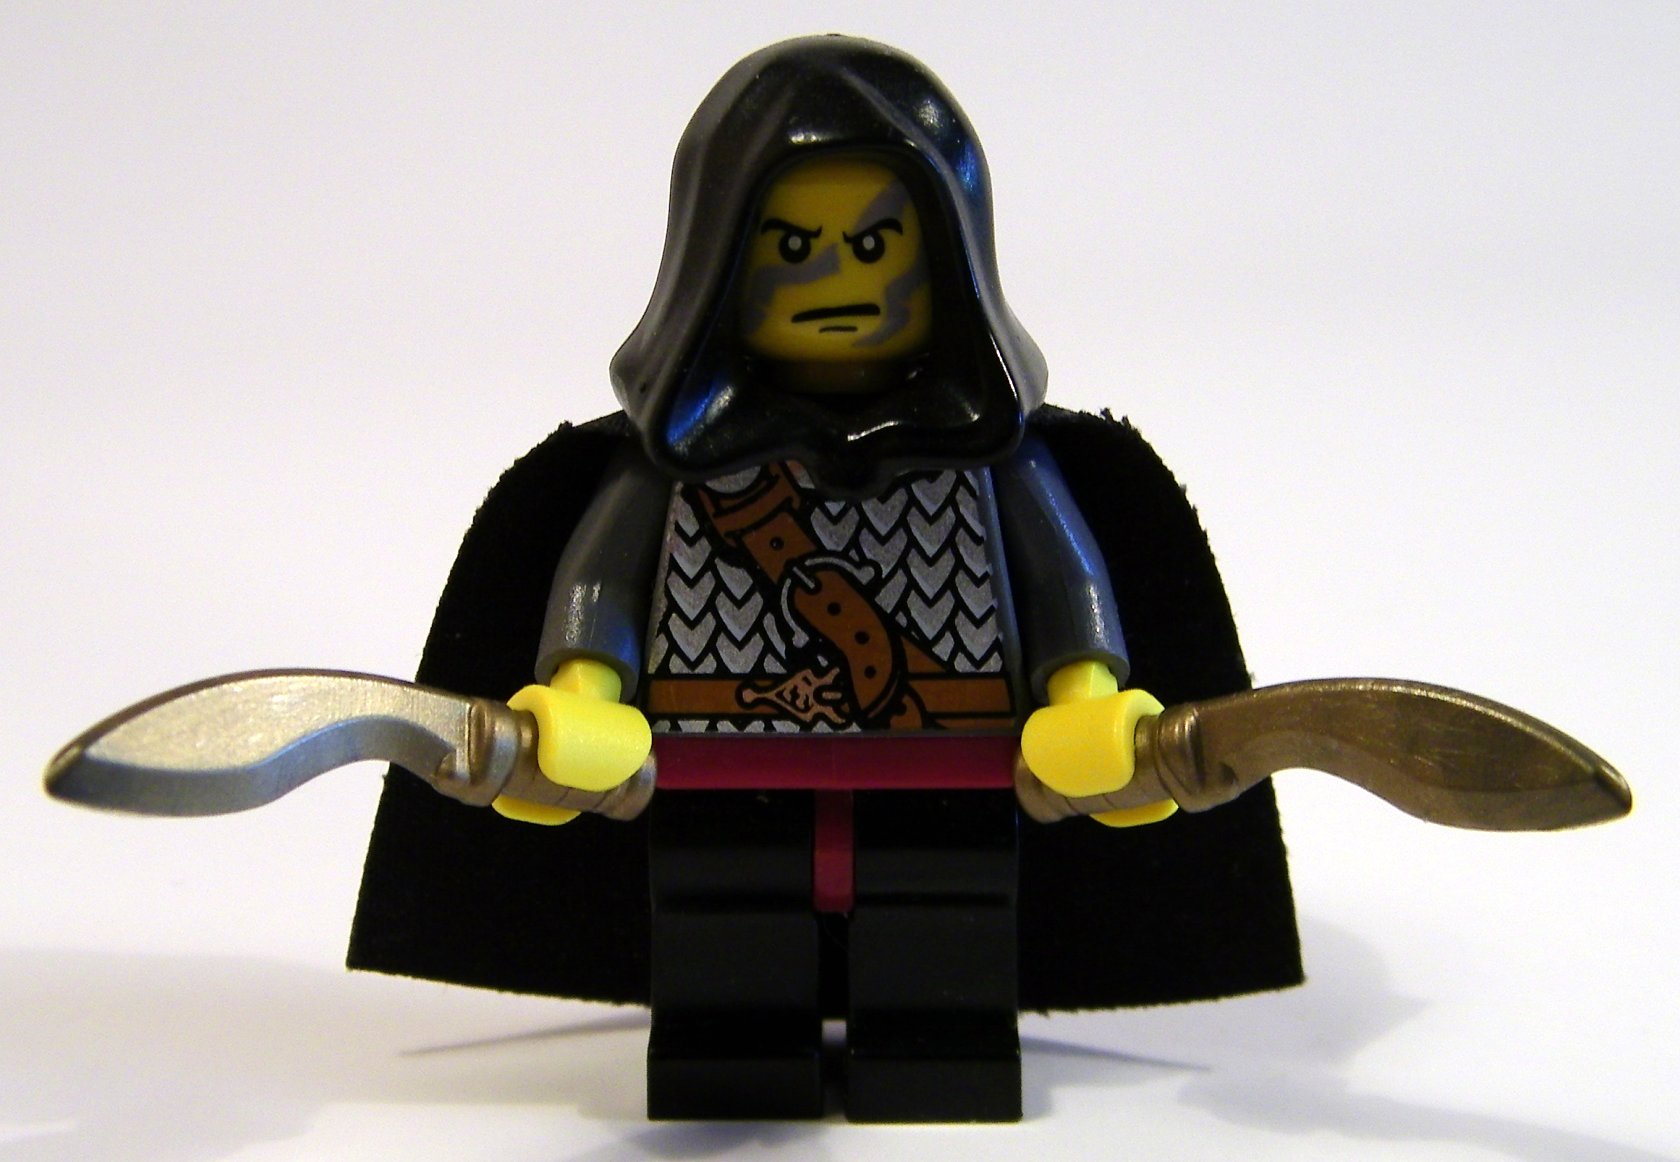 a lego figurine is holding a sword and an axe